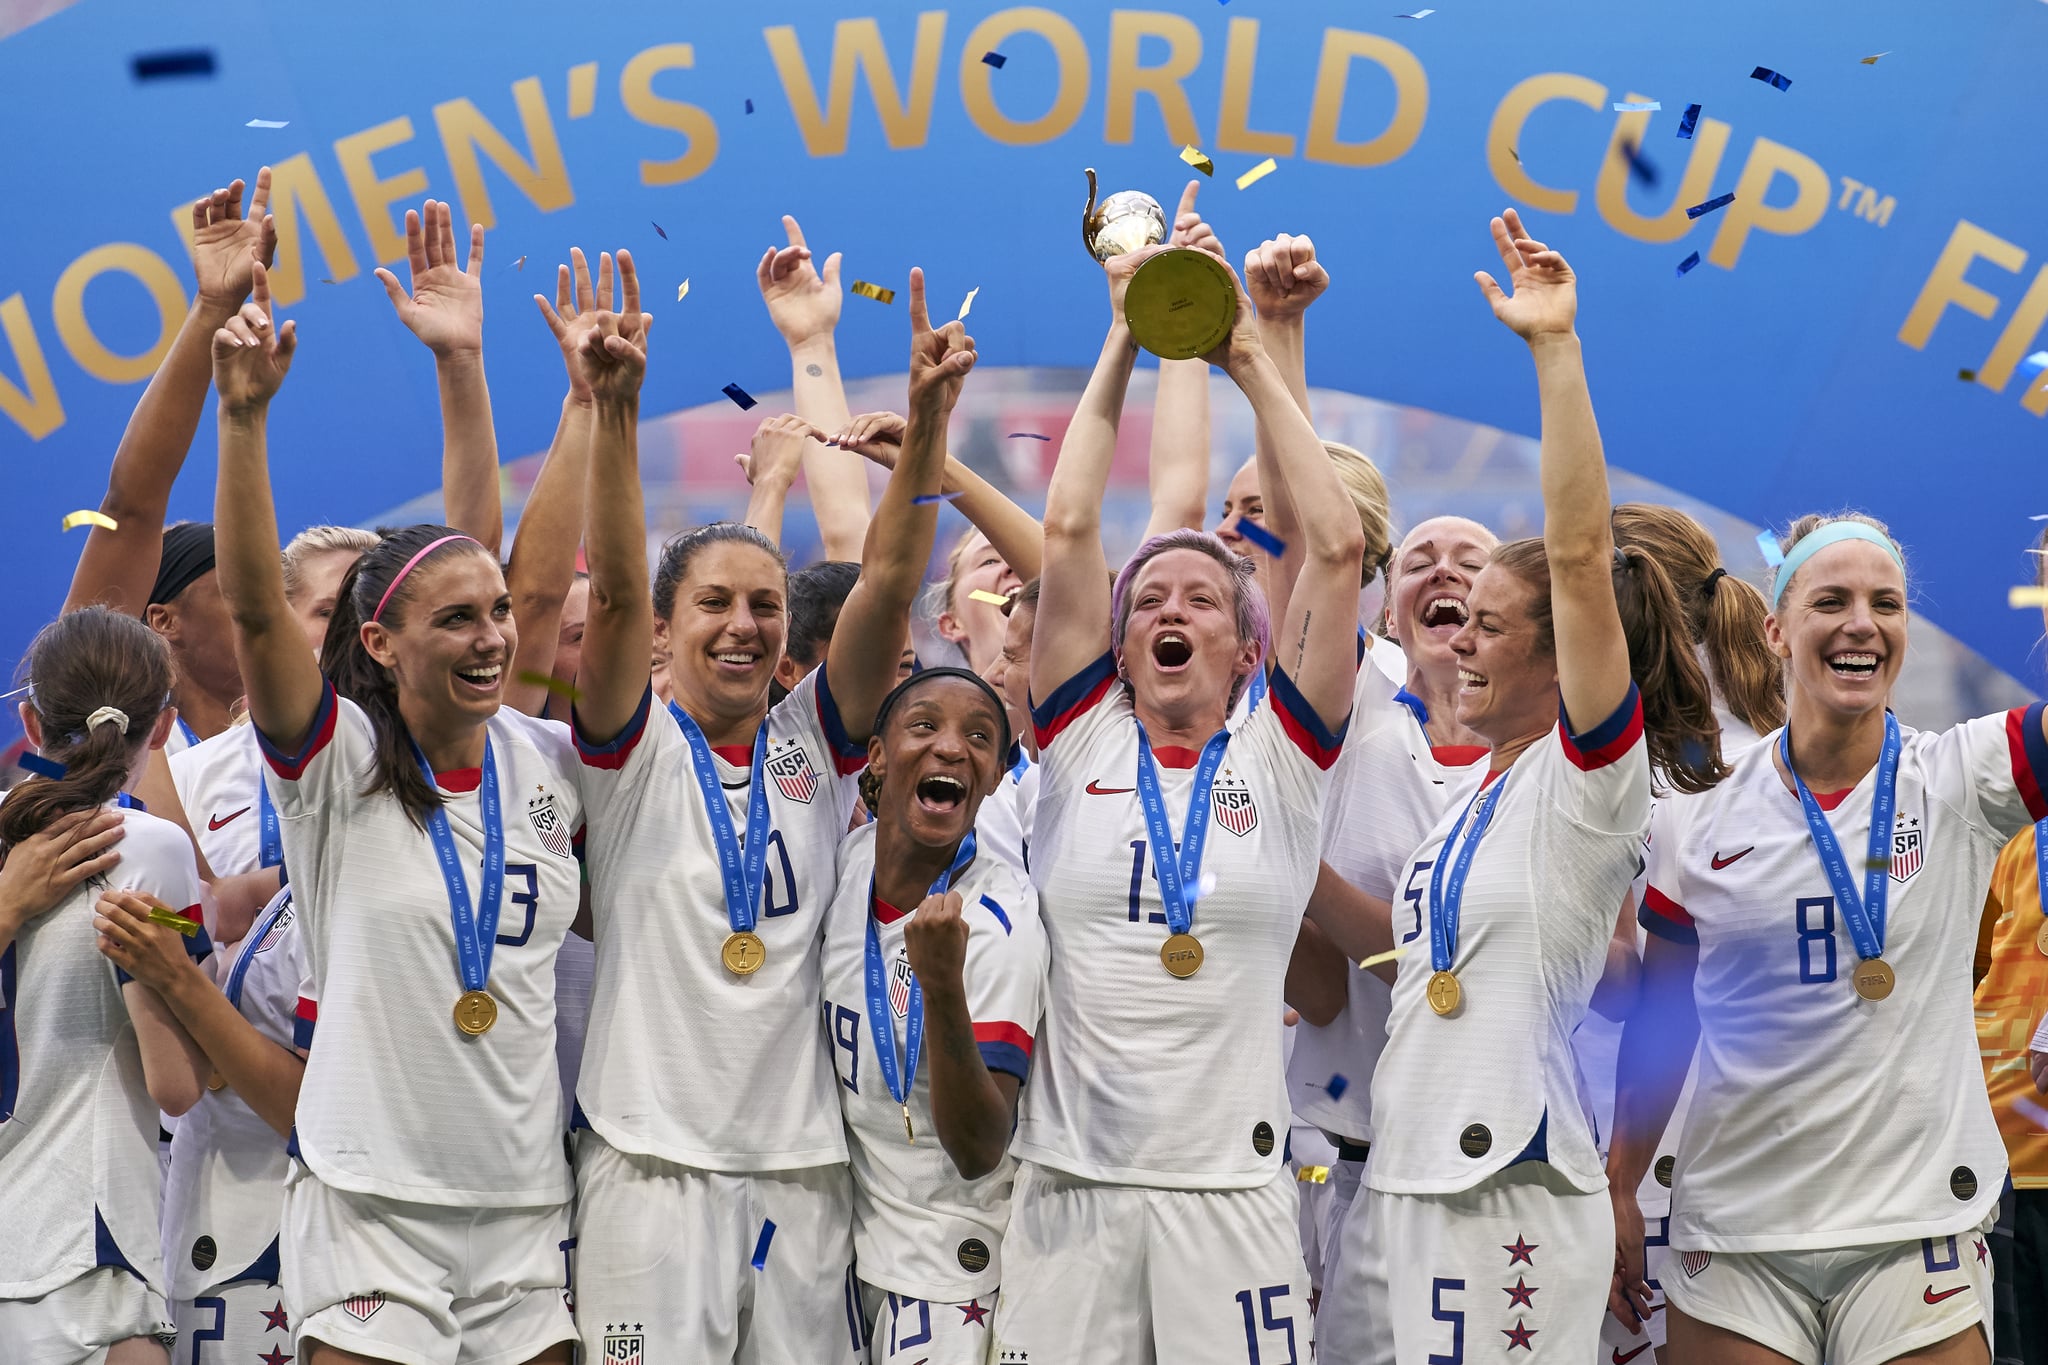 4 Records Broken by the US Women's Soccer Winning Team at the 2019